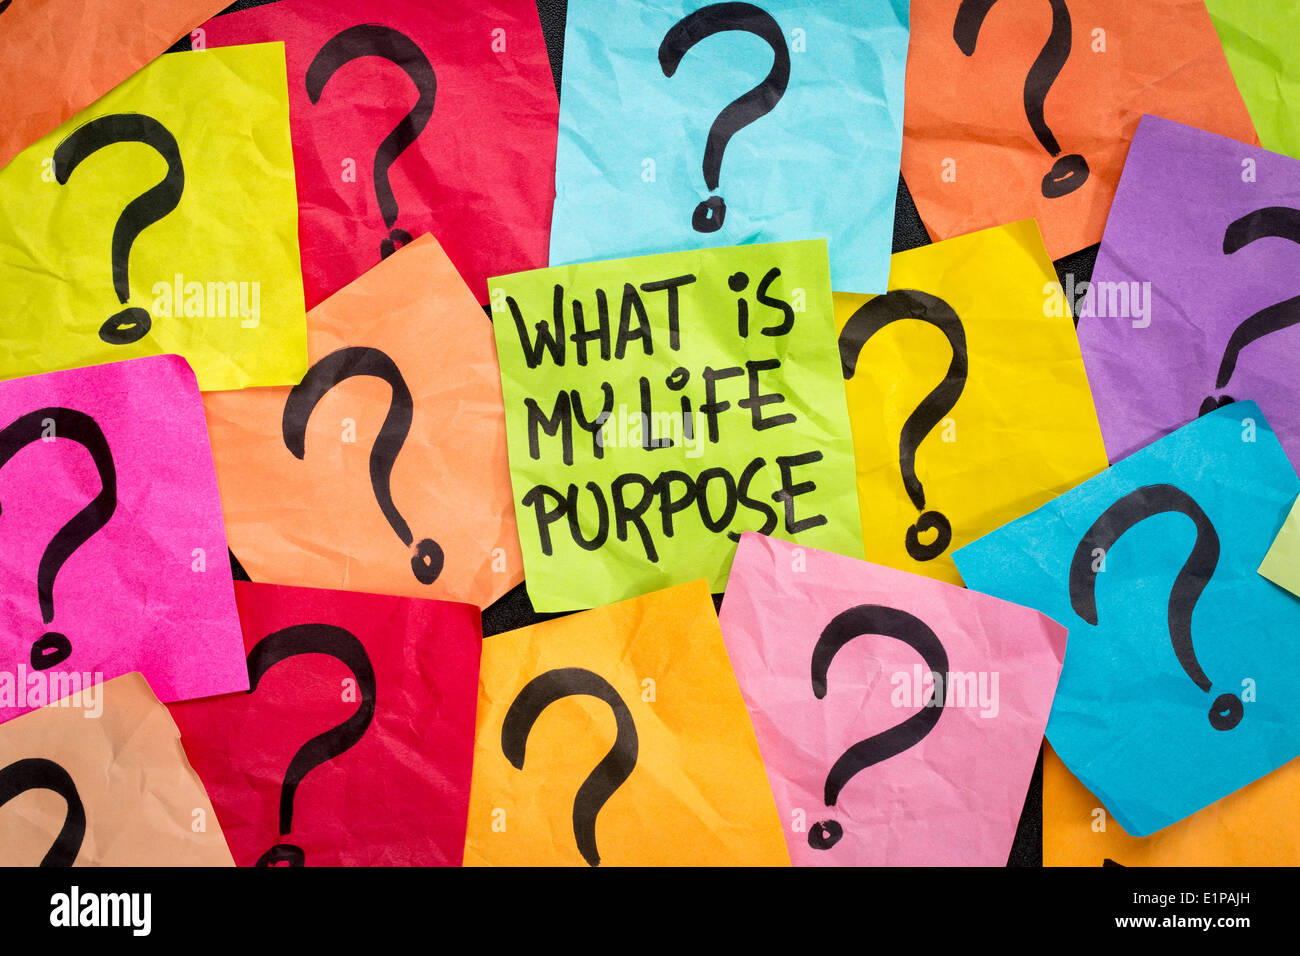 What is my life purpose question - handwriting on colorful sticky notes Stock Photo